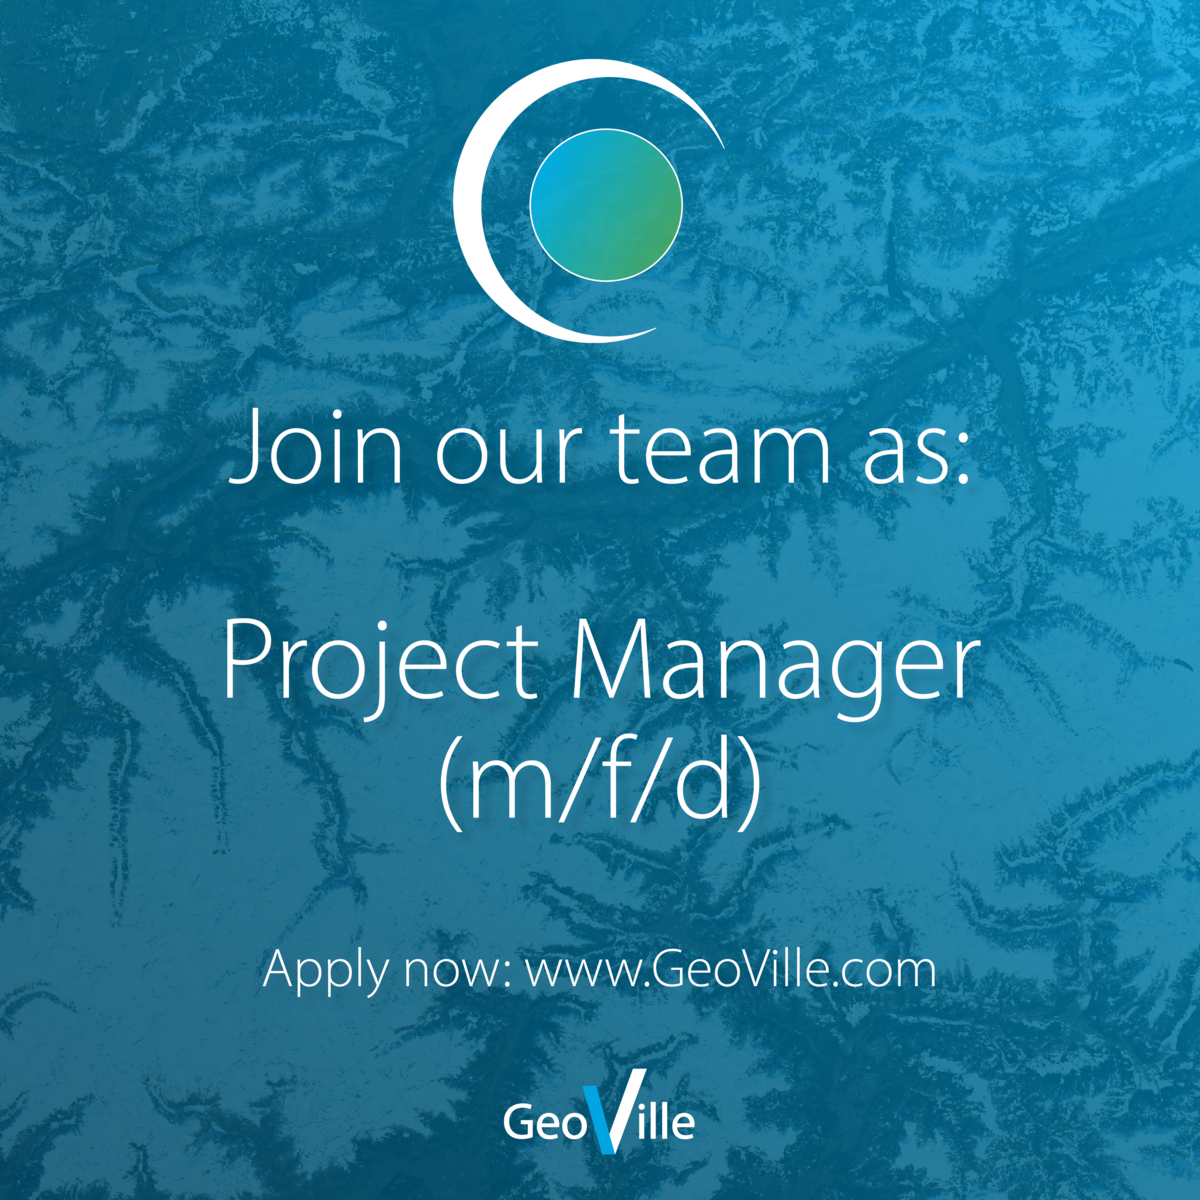 Join our Copernicus Department as Project Manager (m/f/d)